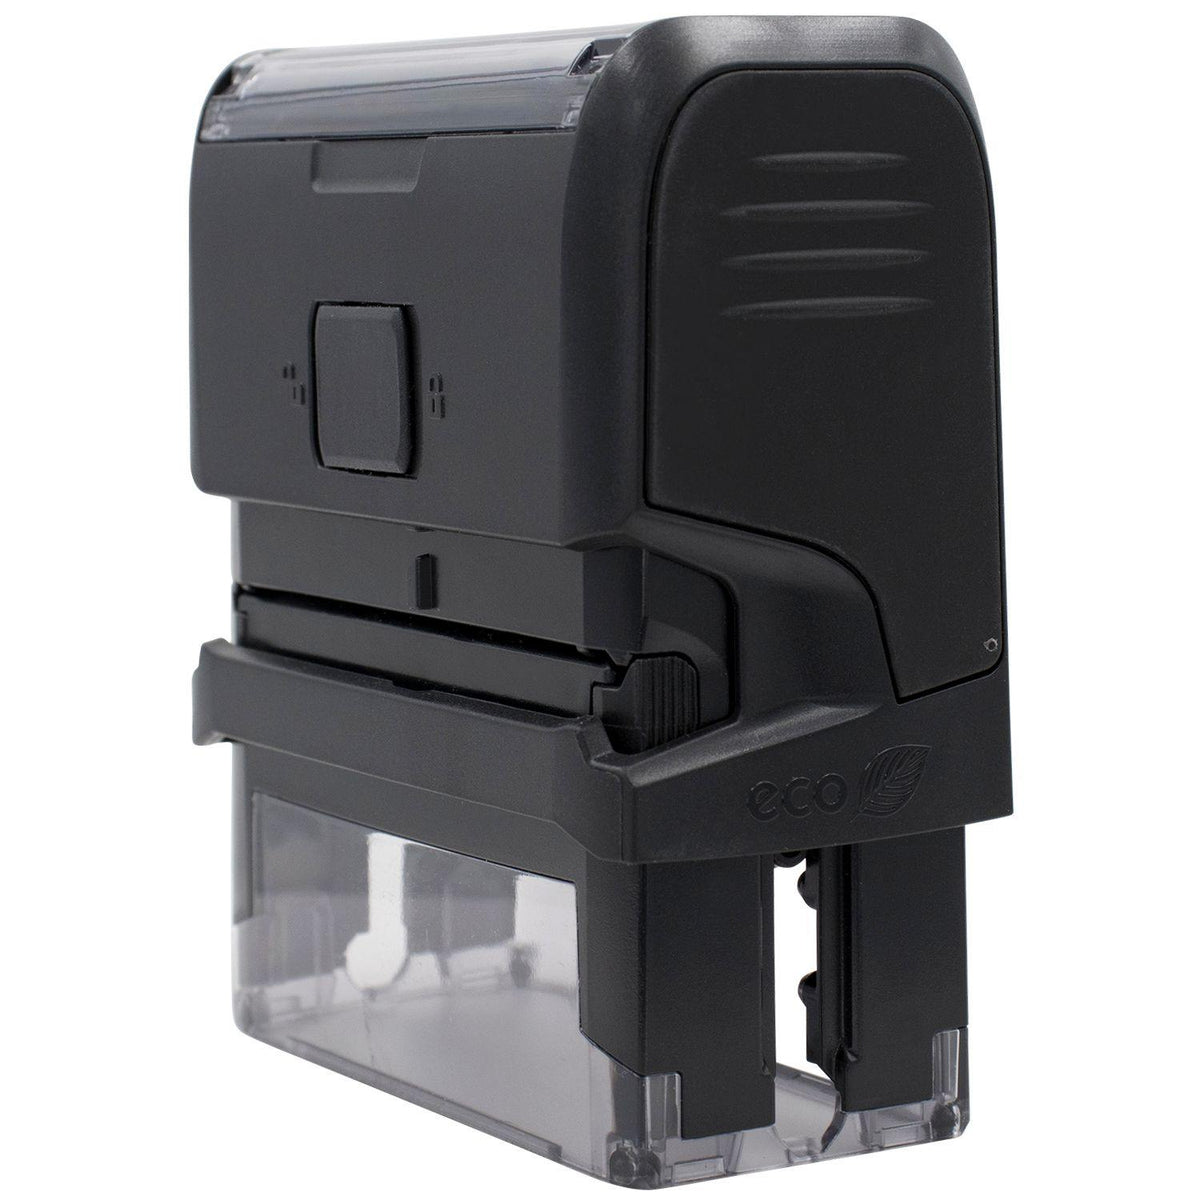 Large Self Inking Returned Not Paid Stamp - Engineer Seal Stamps - Brand_Trodat, Impression Size_Large, Stamp Type_Self-Inking Stamp, Type of Use_Business